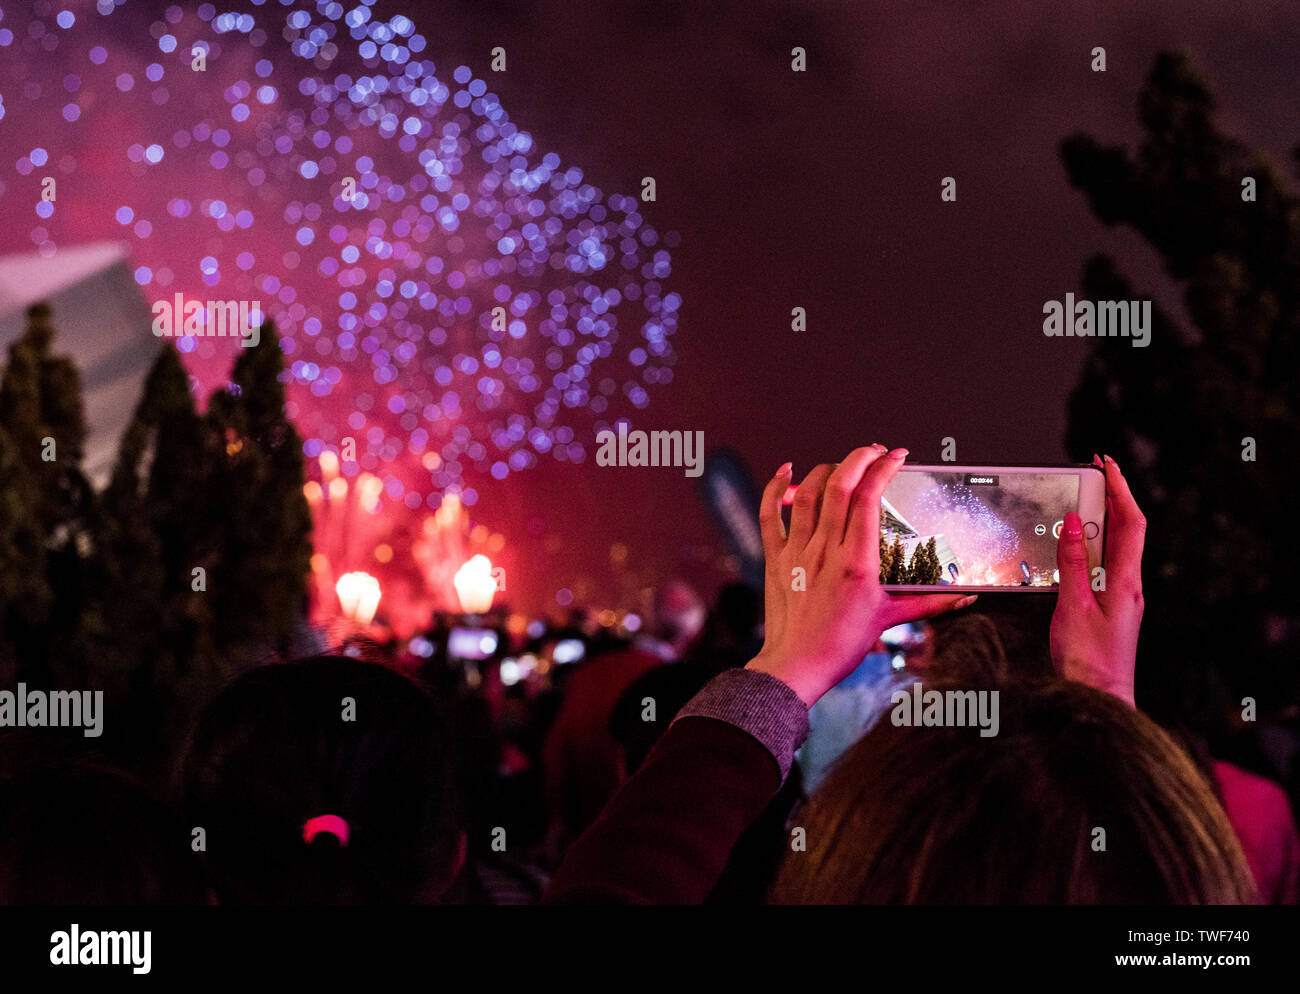 Woman photographing fireworks using smartphone during Chinese New Year celebrations in Kowloon in Hong Kong. Stock Photo